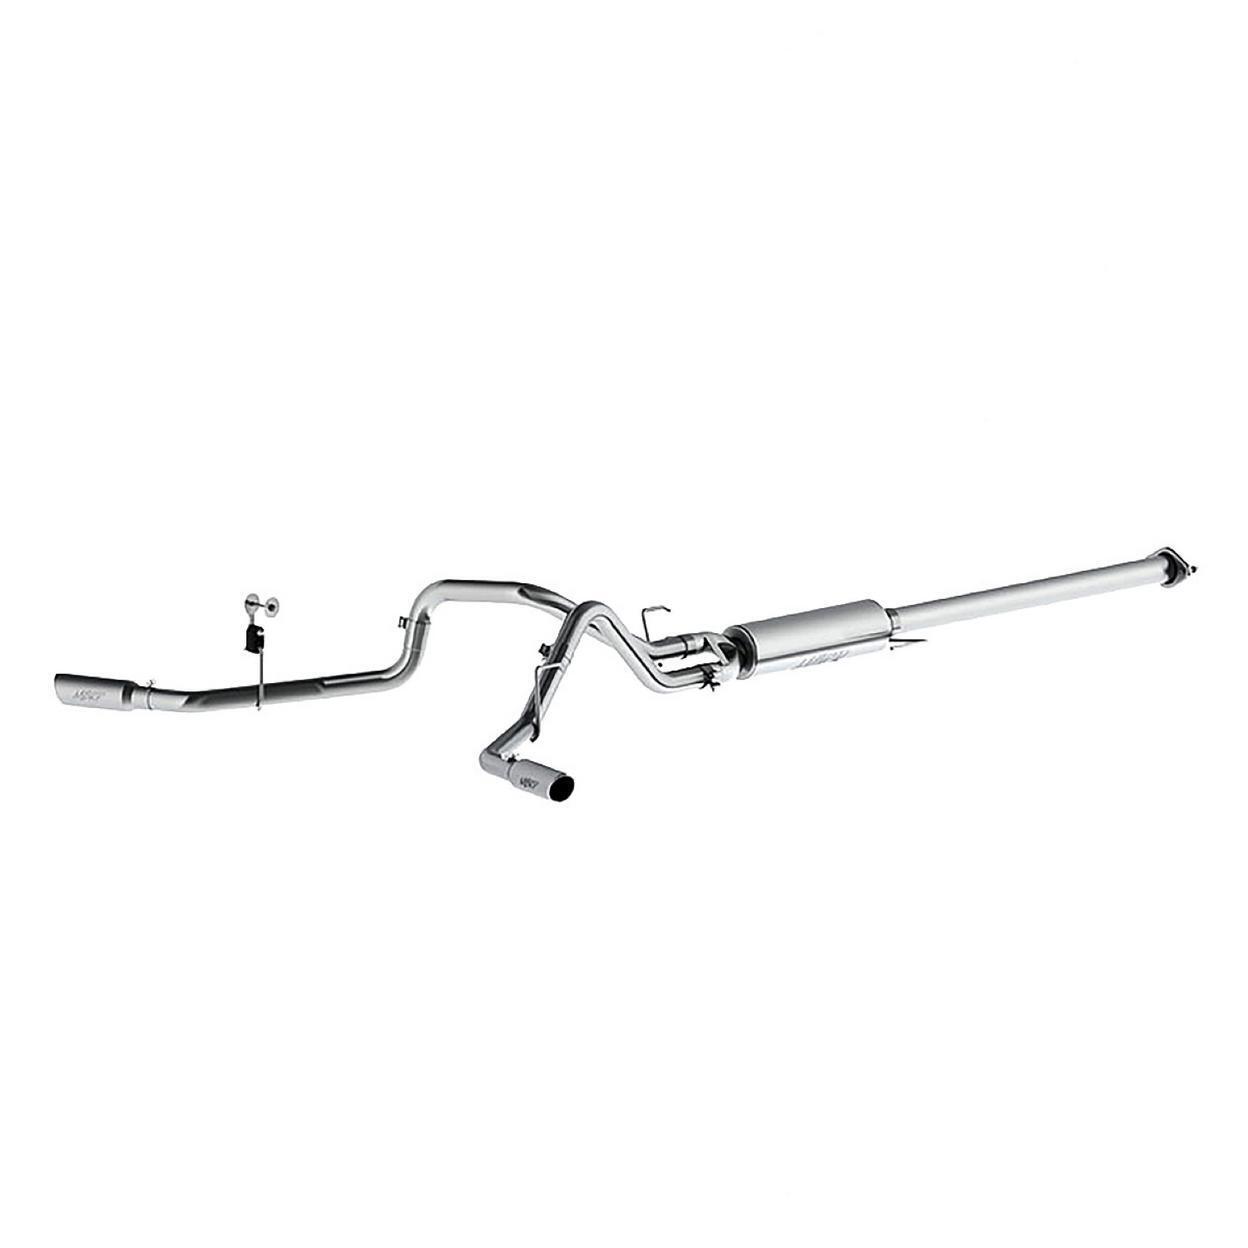 MBRP Exhaust System Kit for 2019-2020 Ford F-150